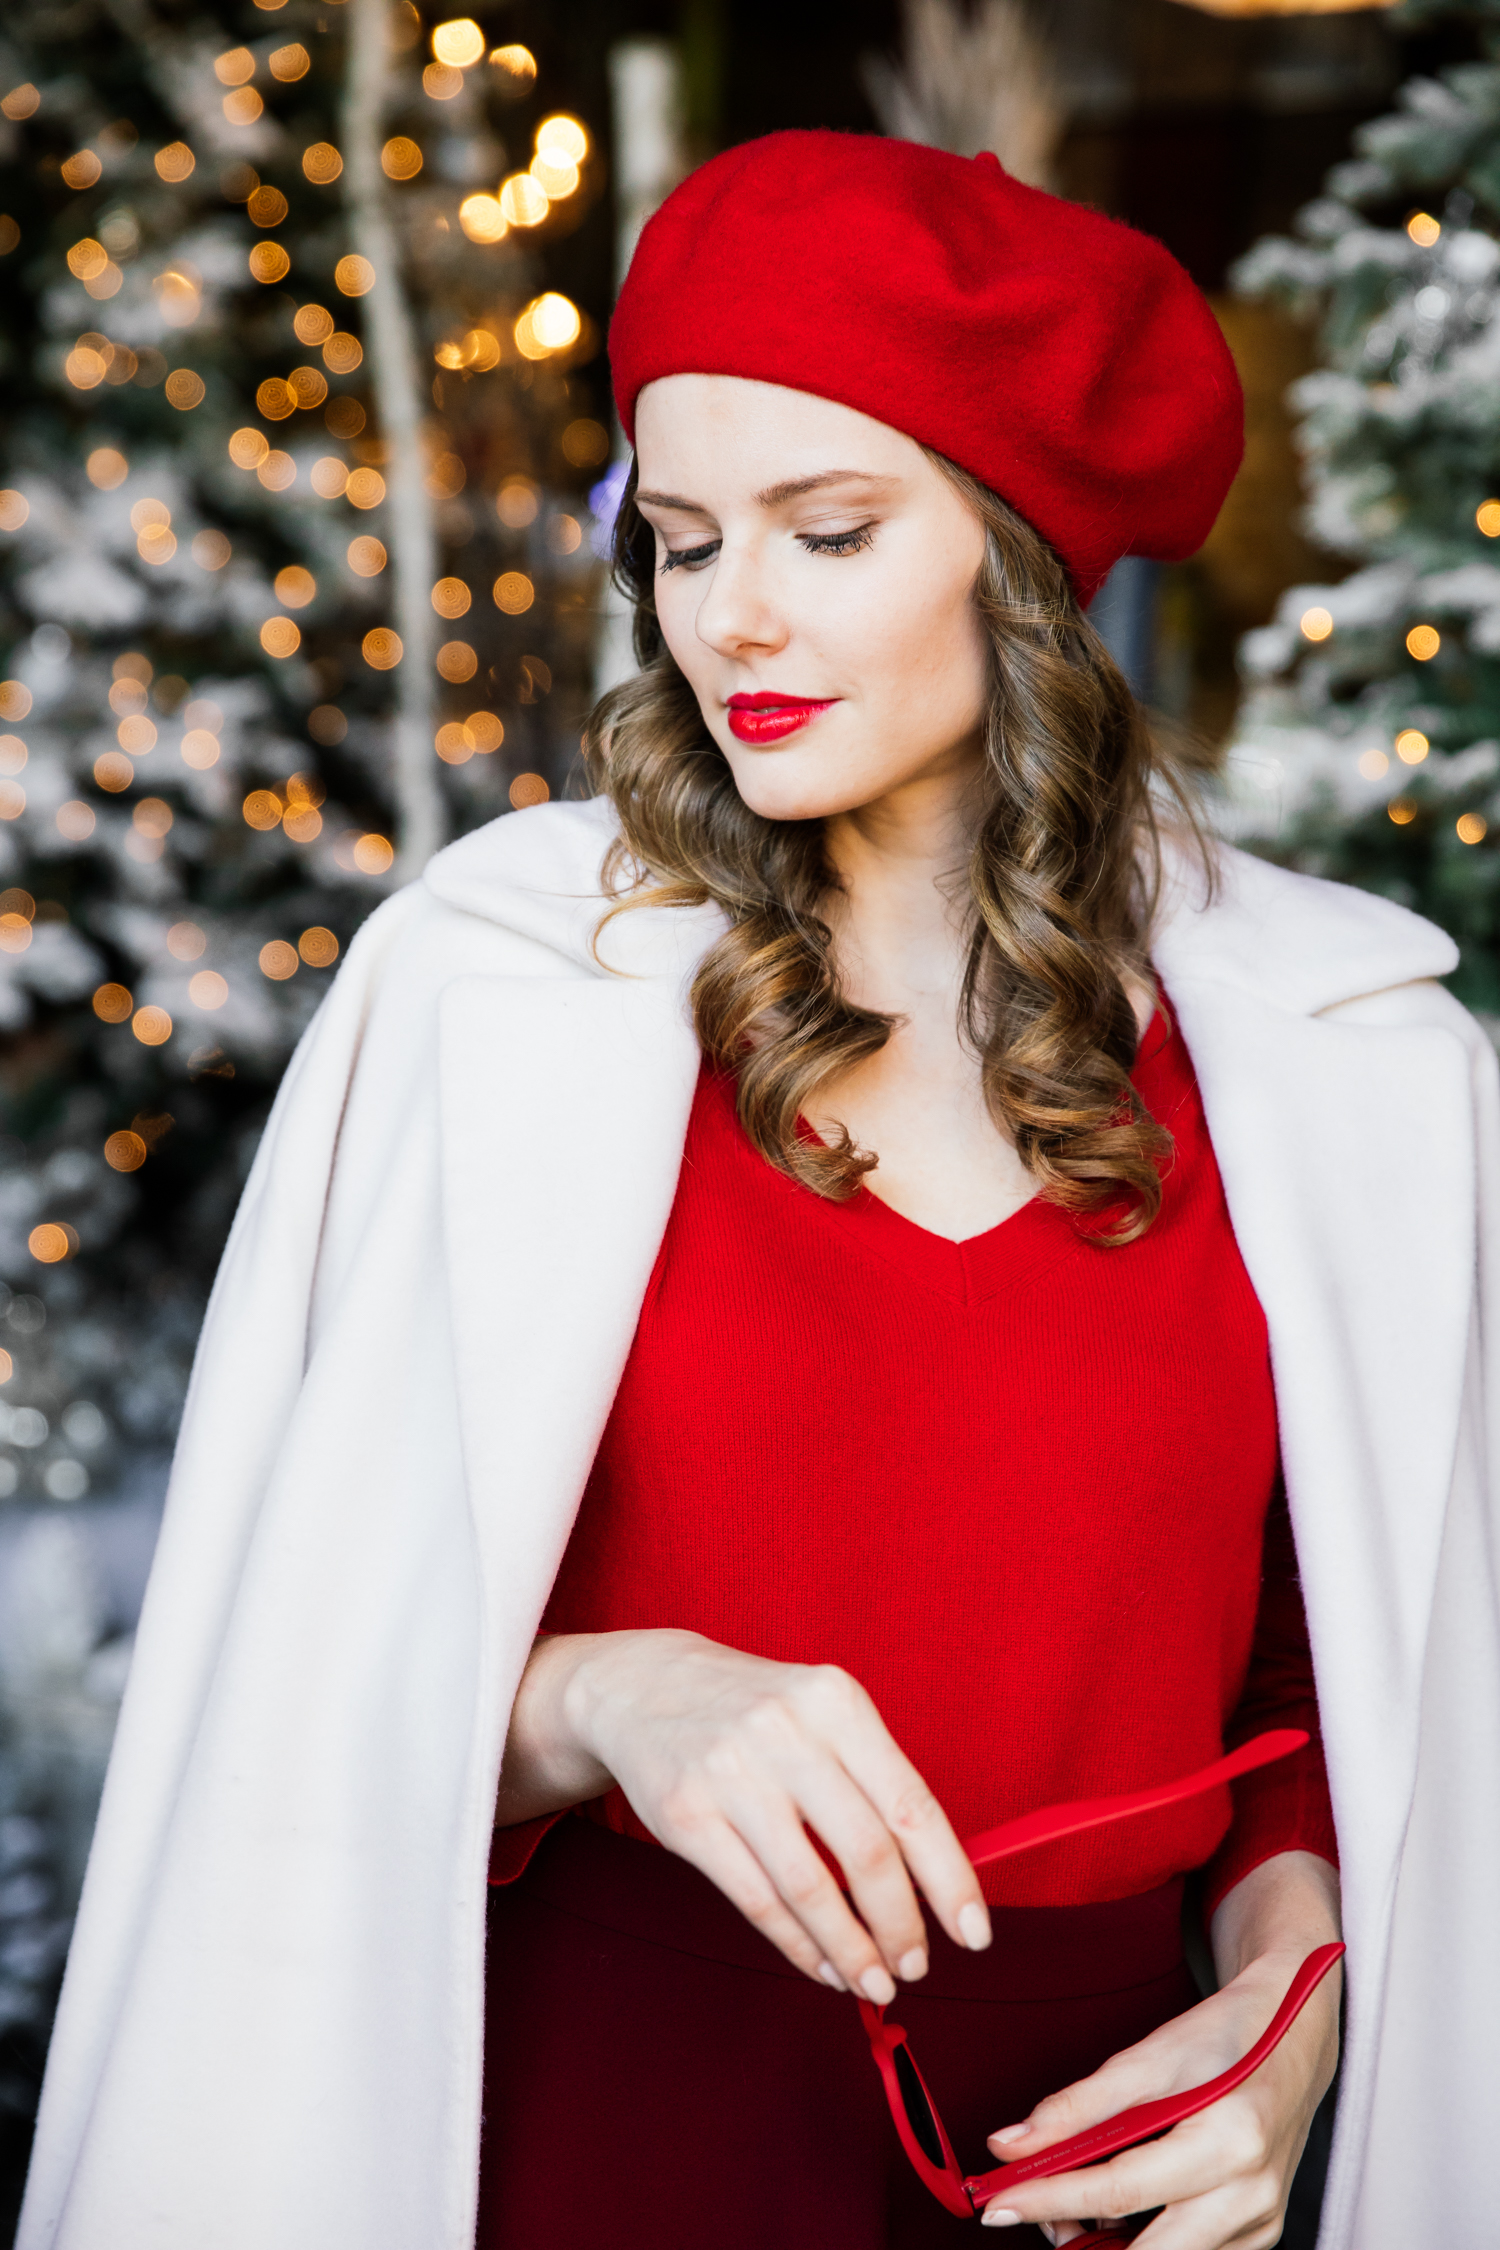 Alyssa Campanella of The A List blog shares her last minute holiday look wearing Talbots cashmere v-neck sweater, Club Monaco Leala red skirt, and a red Topshop beret